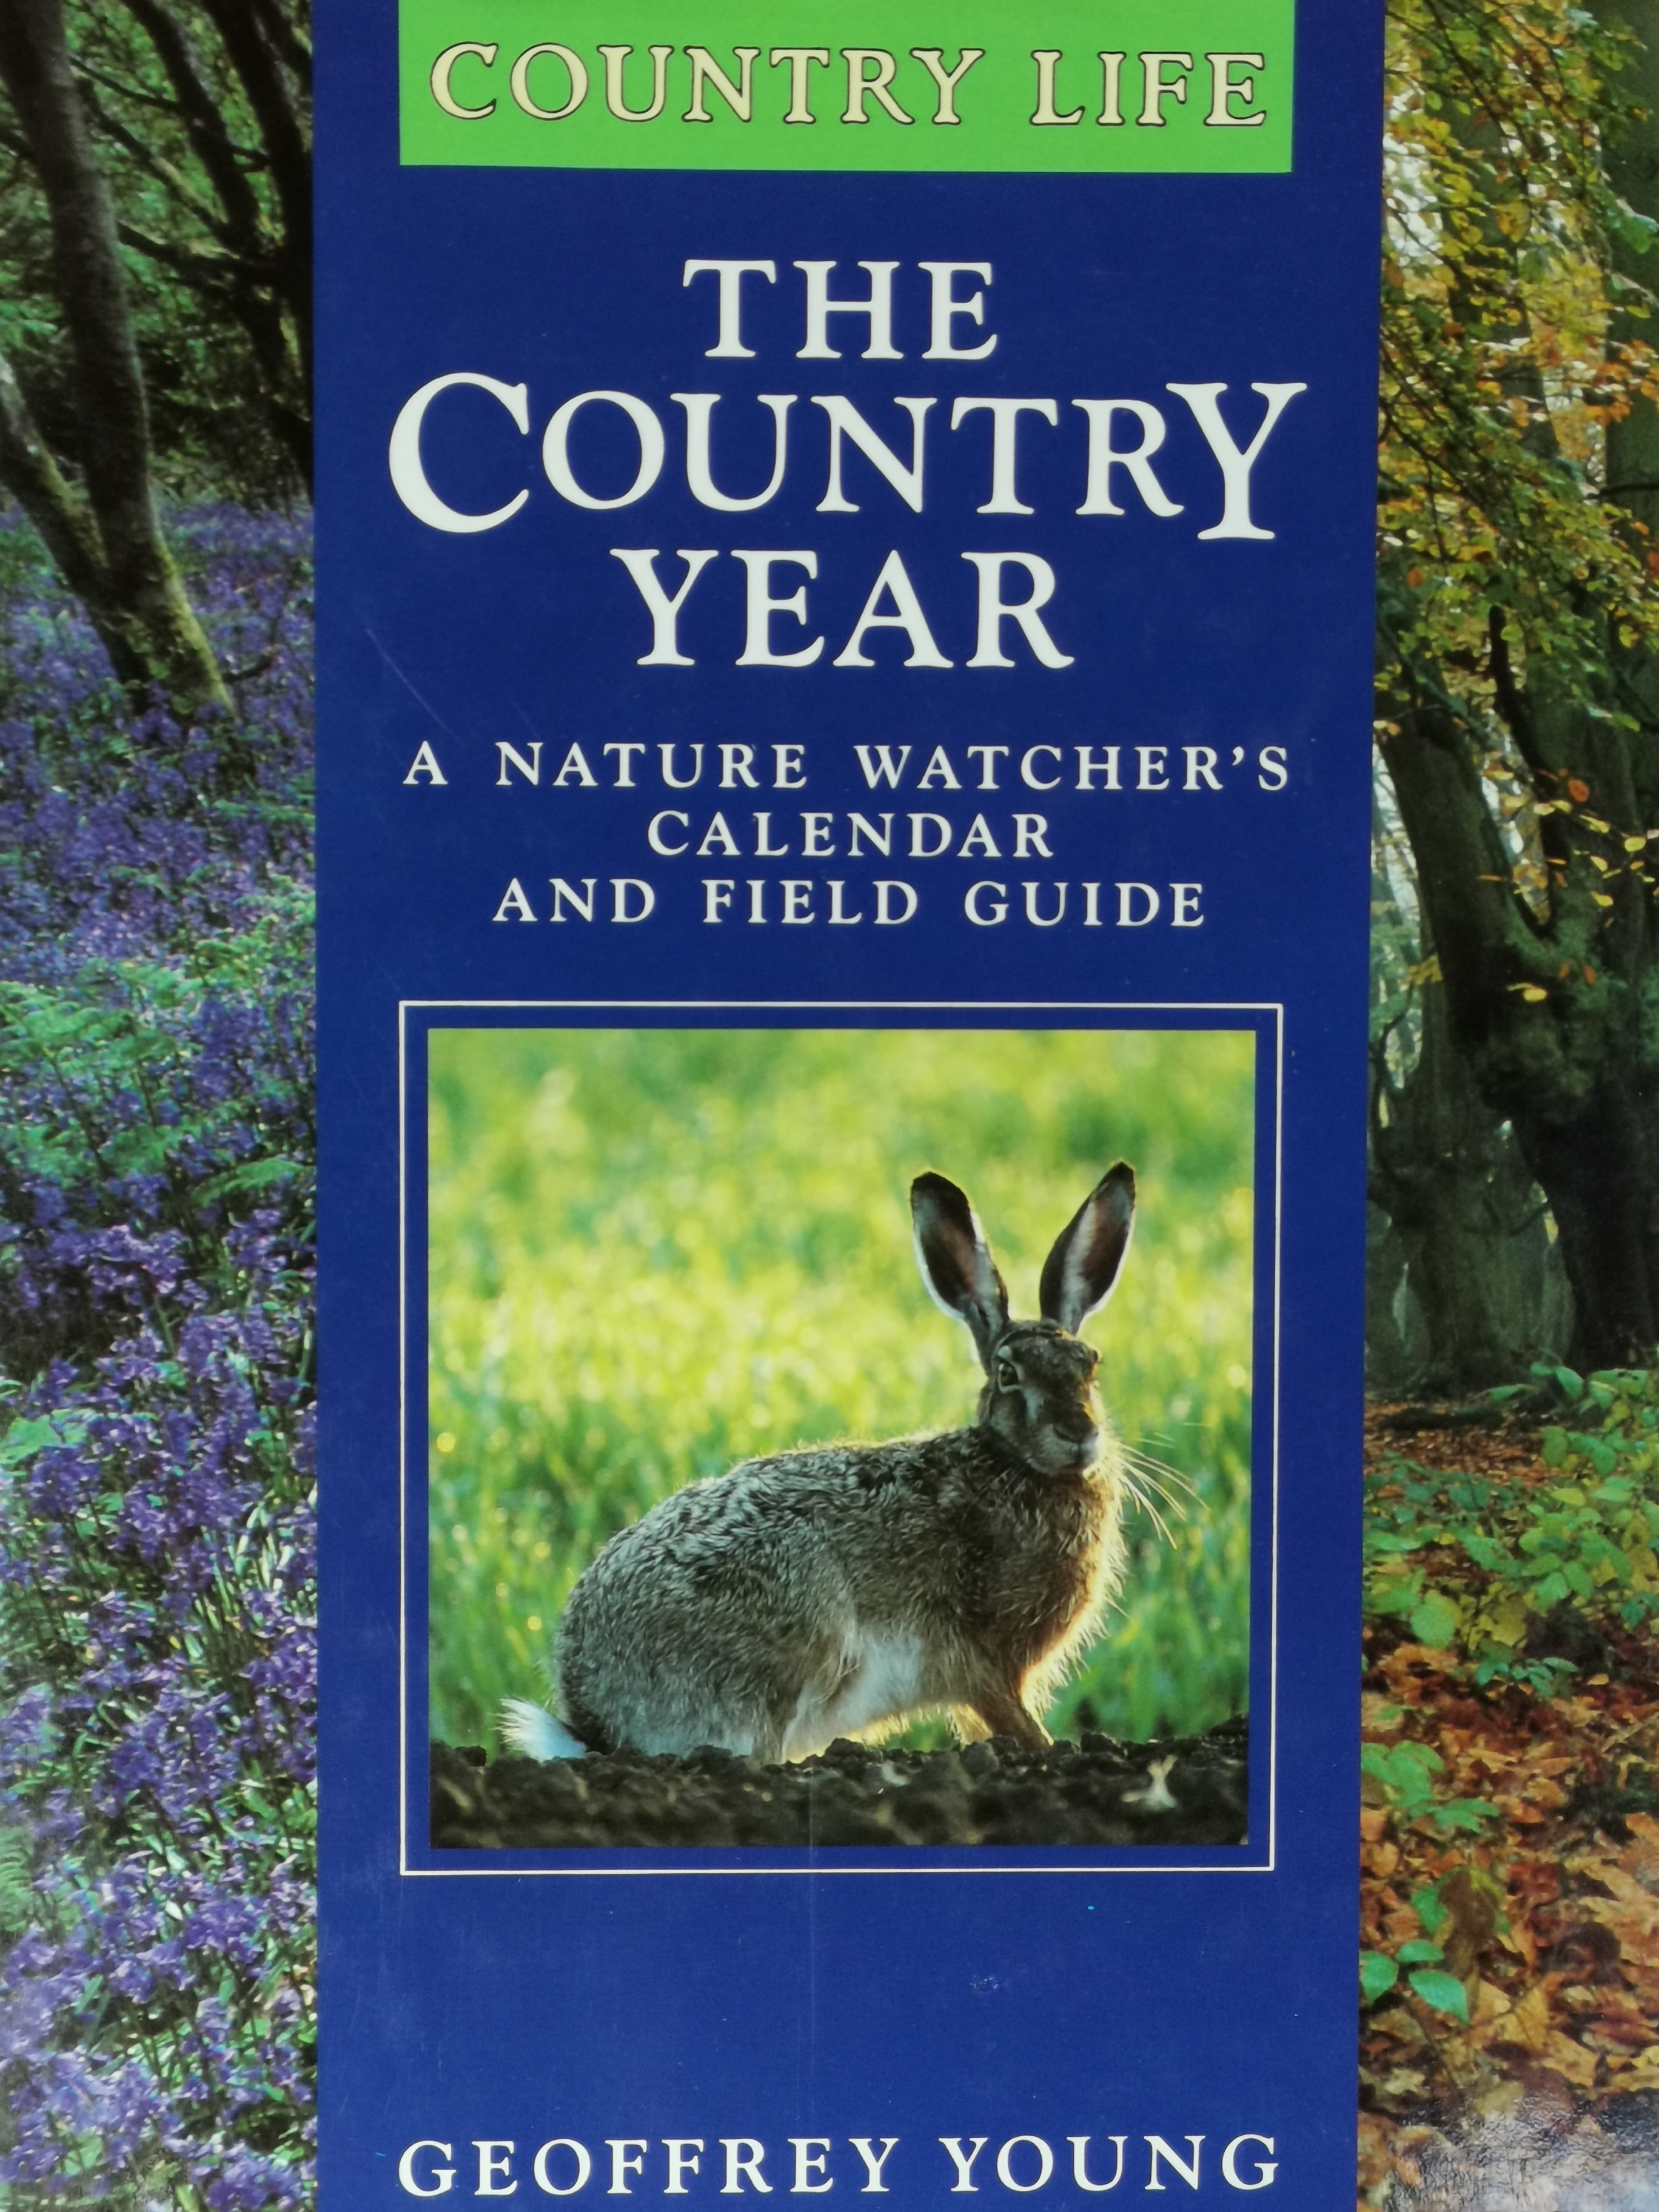 The Country Year: A Nature Watcher's Calendar and Field Guide - Geoffrey Young